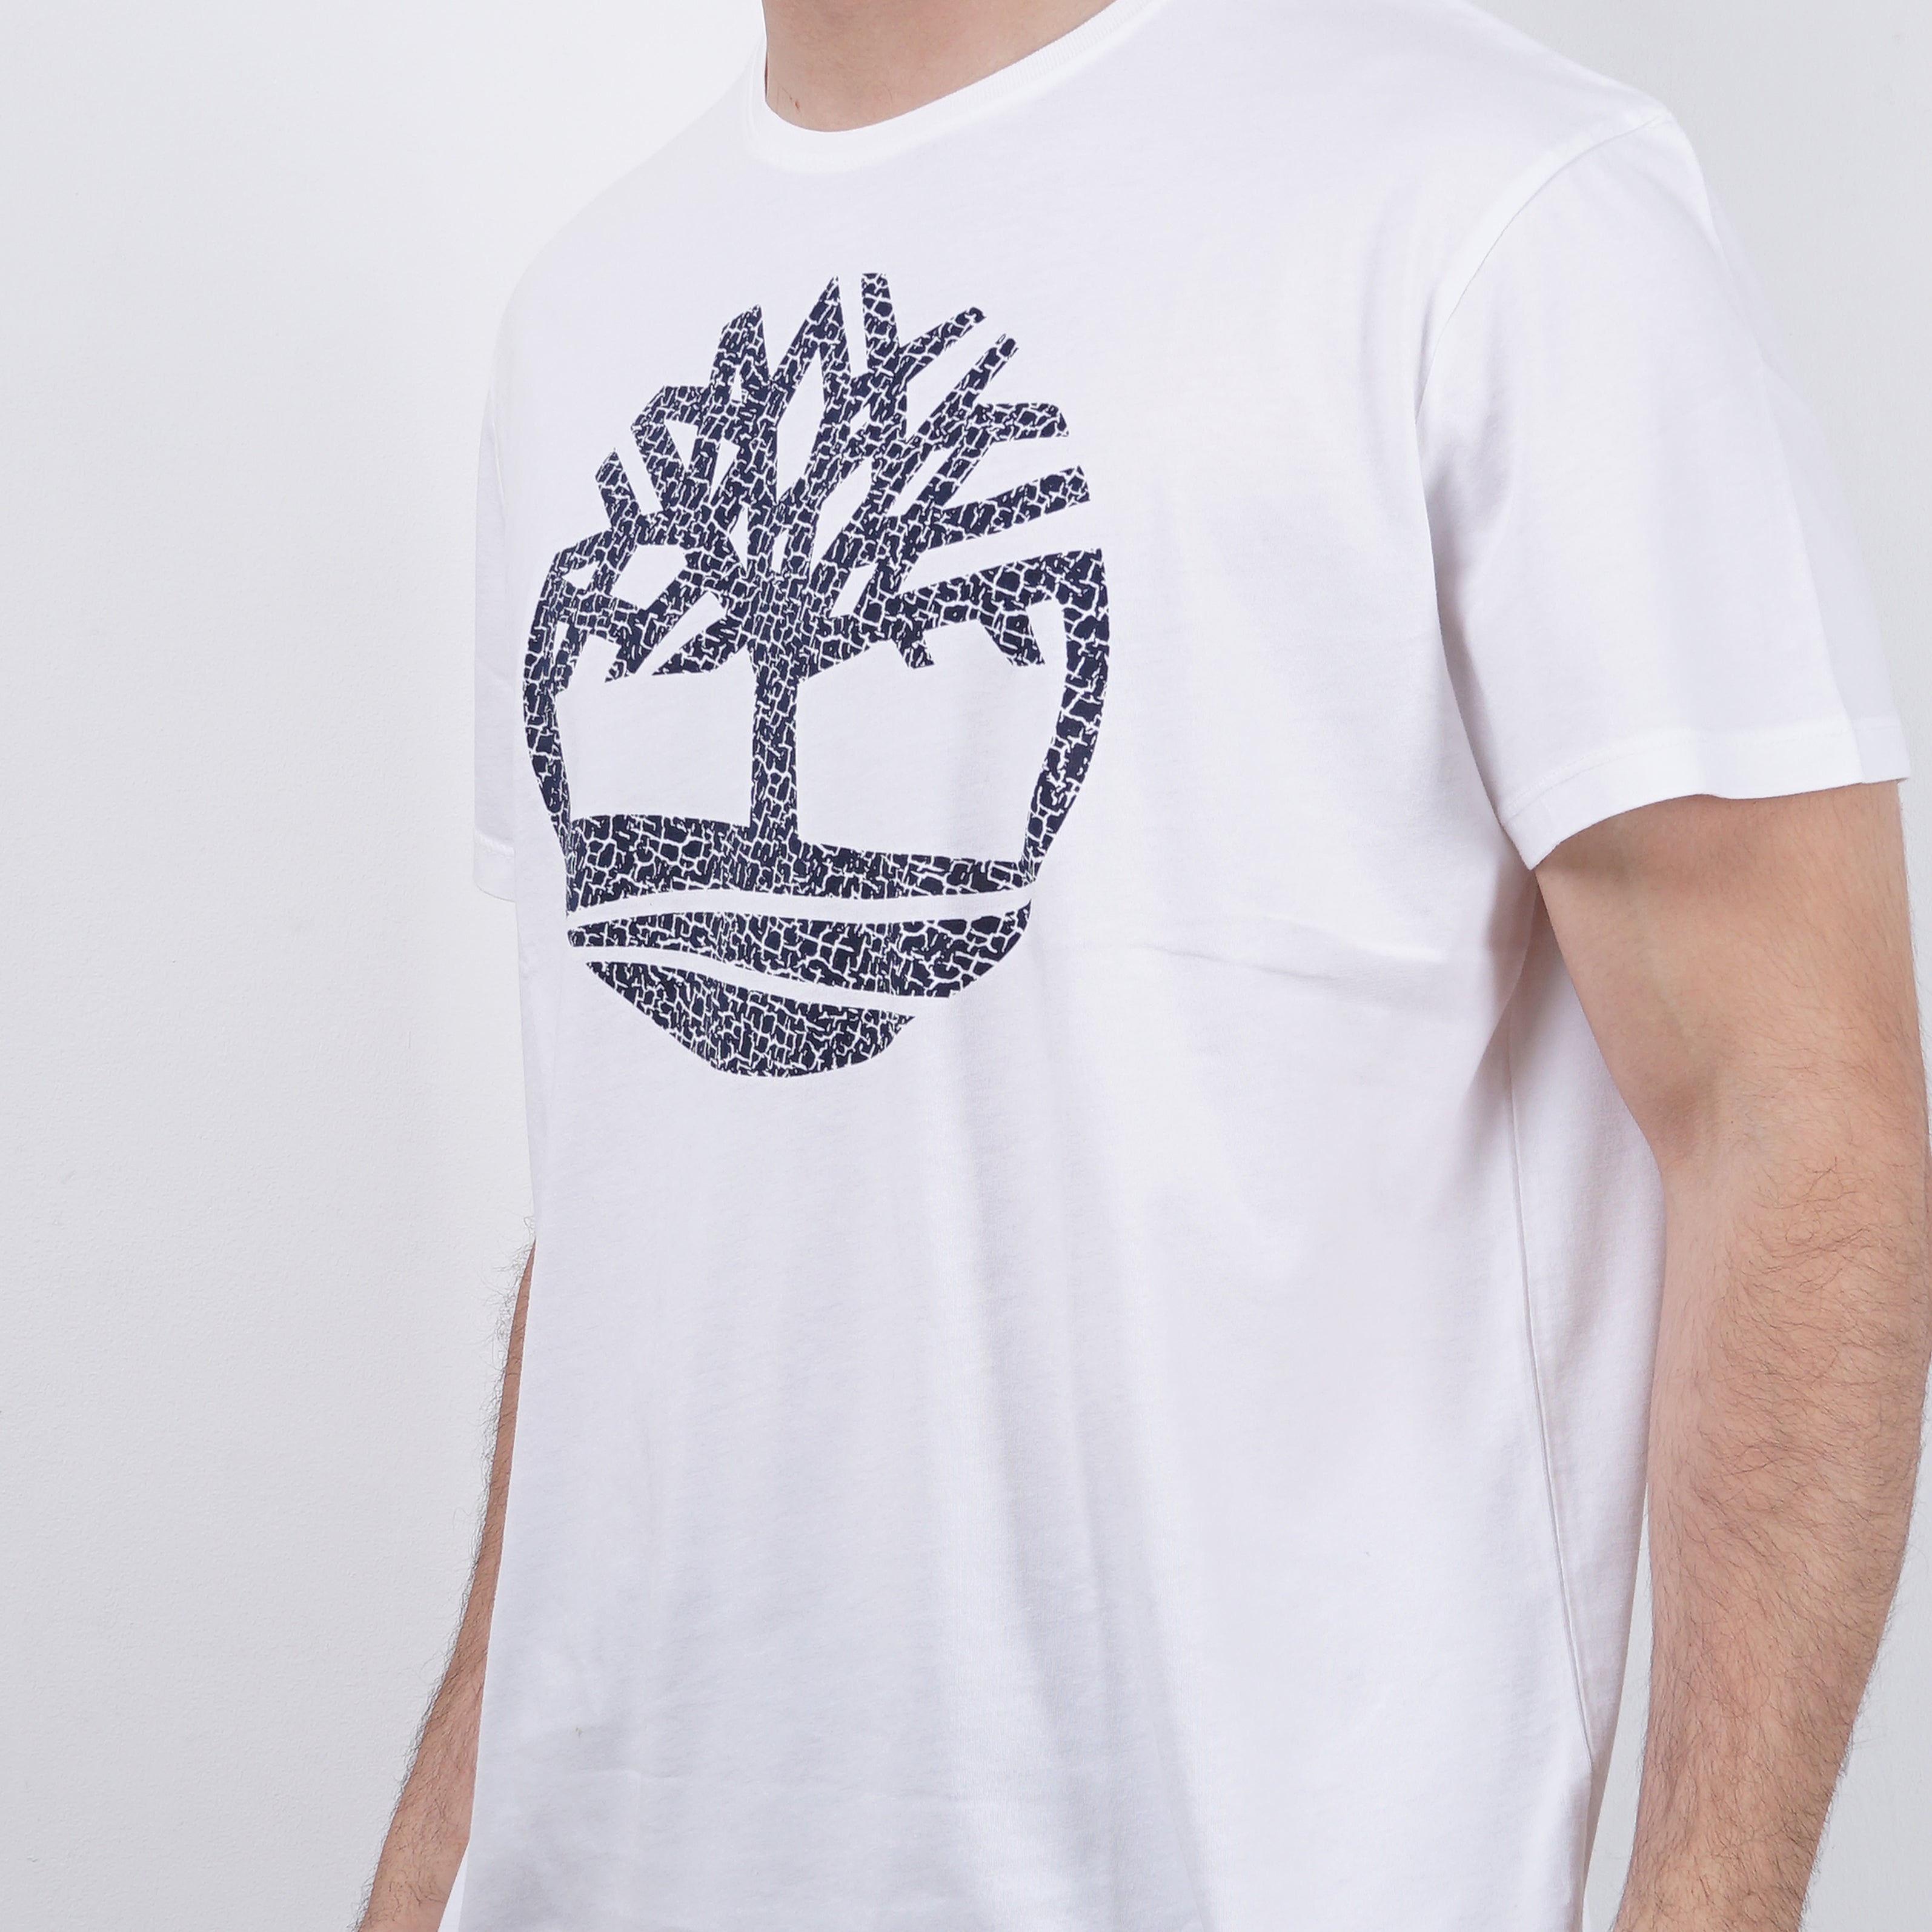 Man wearing white T-shirt with abstract Timberland logo design, fashion apparel on white background.